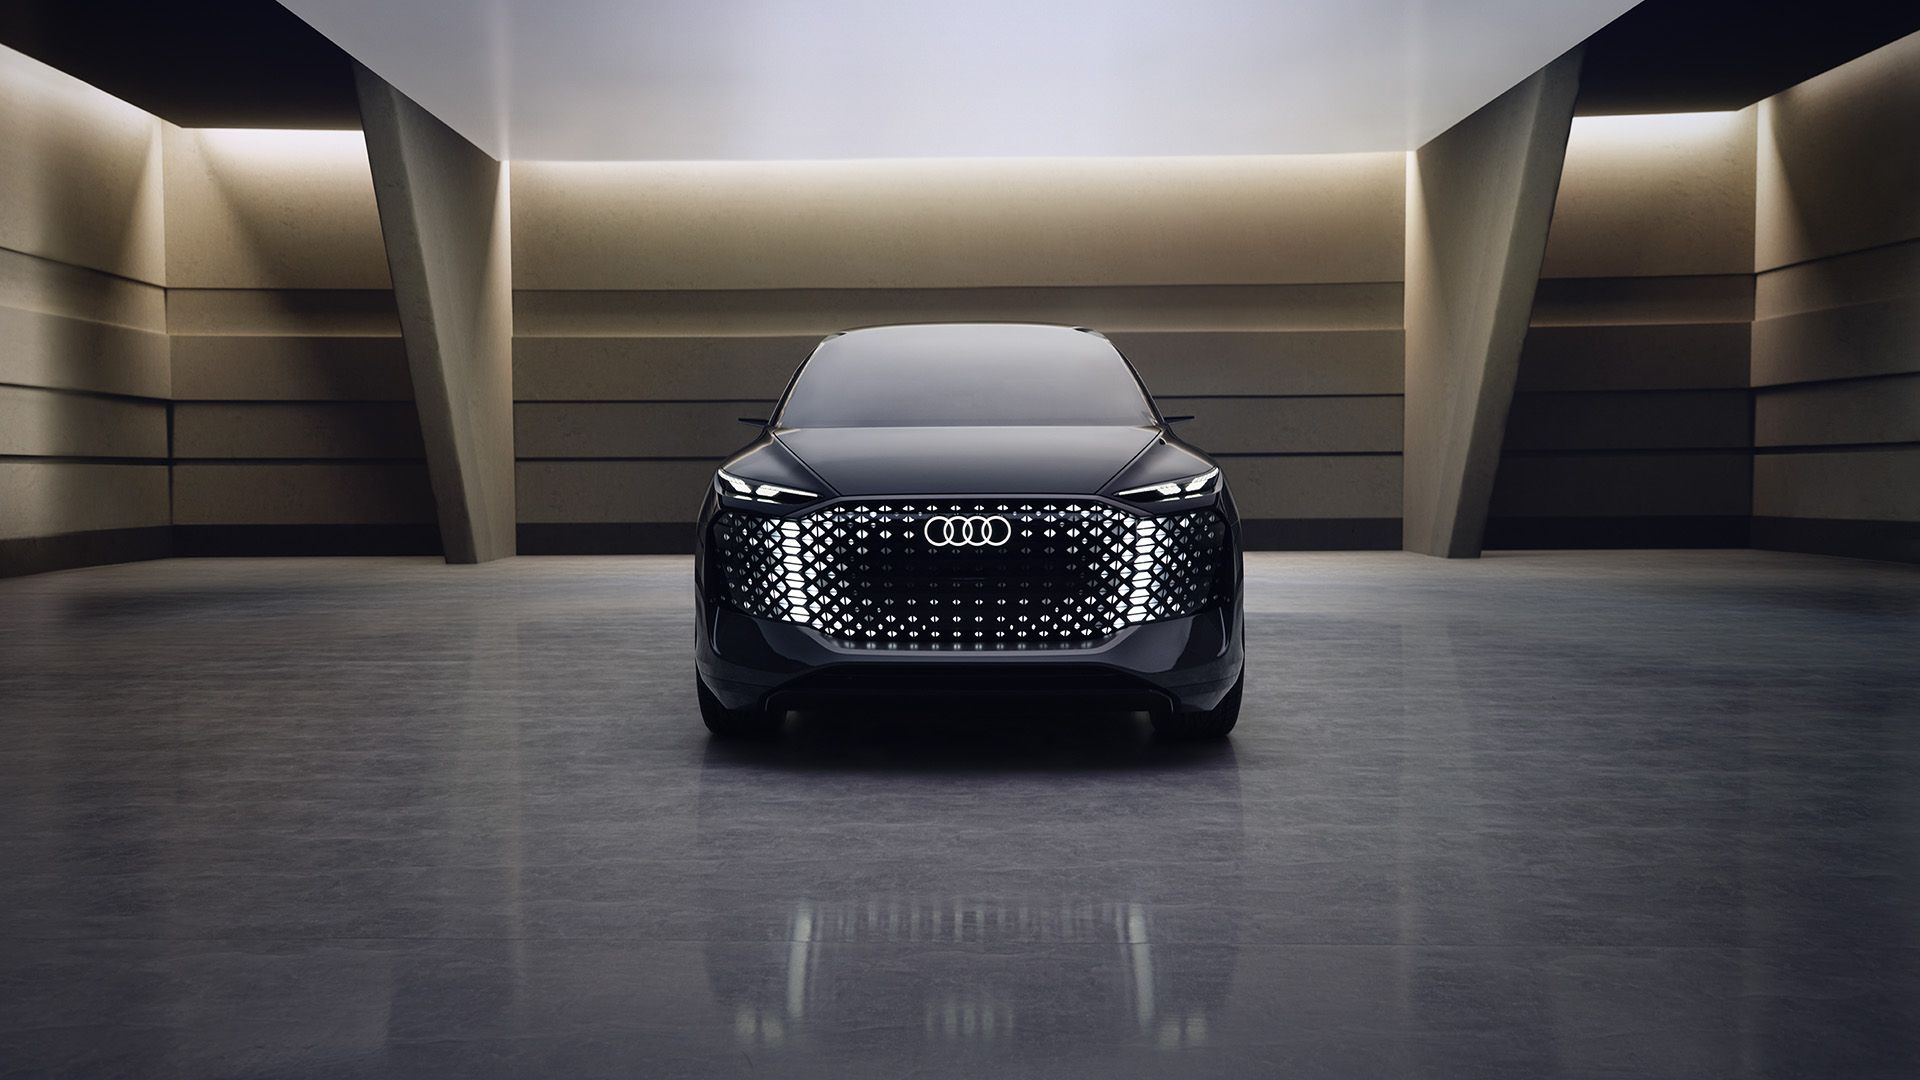 Front view of the Audi urbansphere concept with illuminated LEDs.